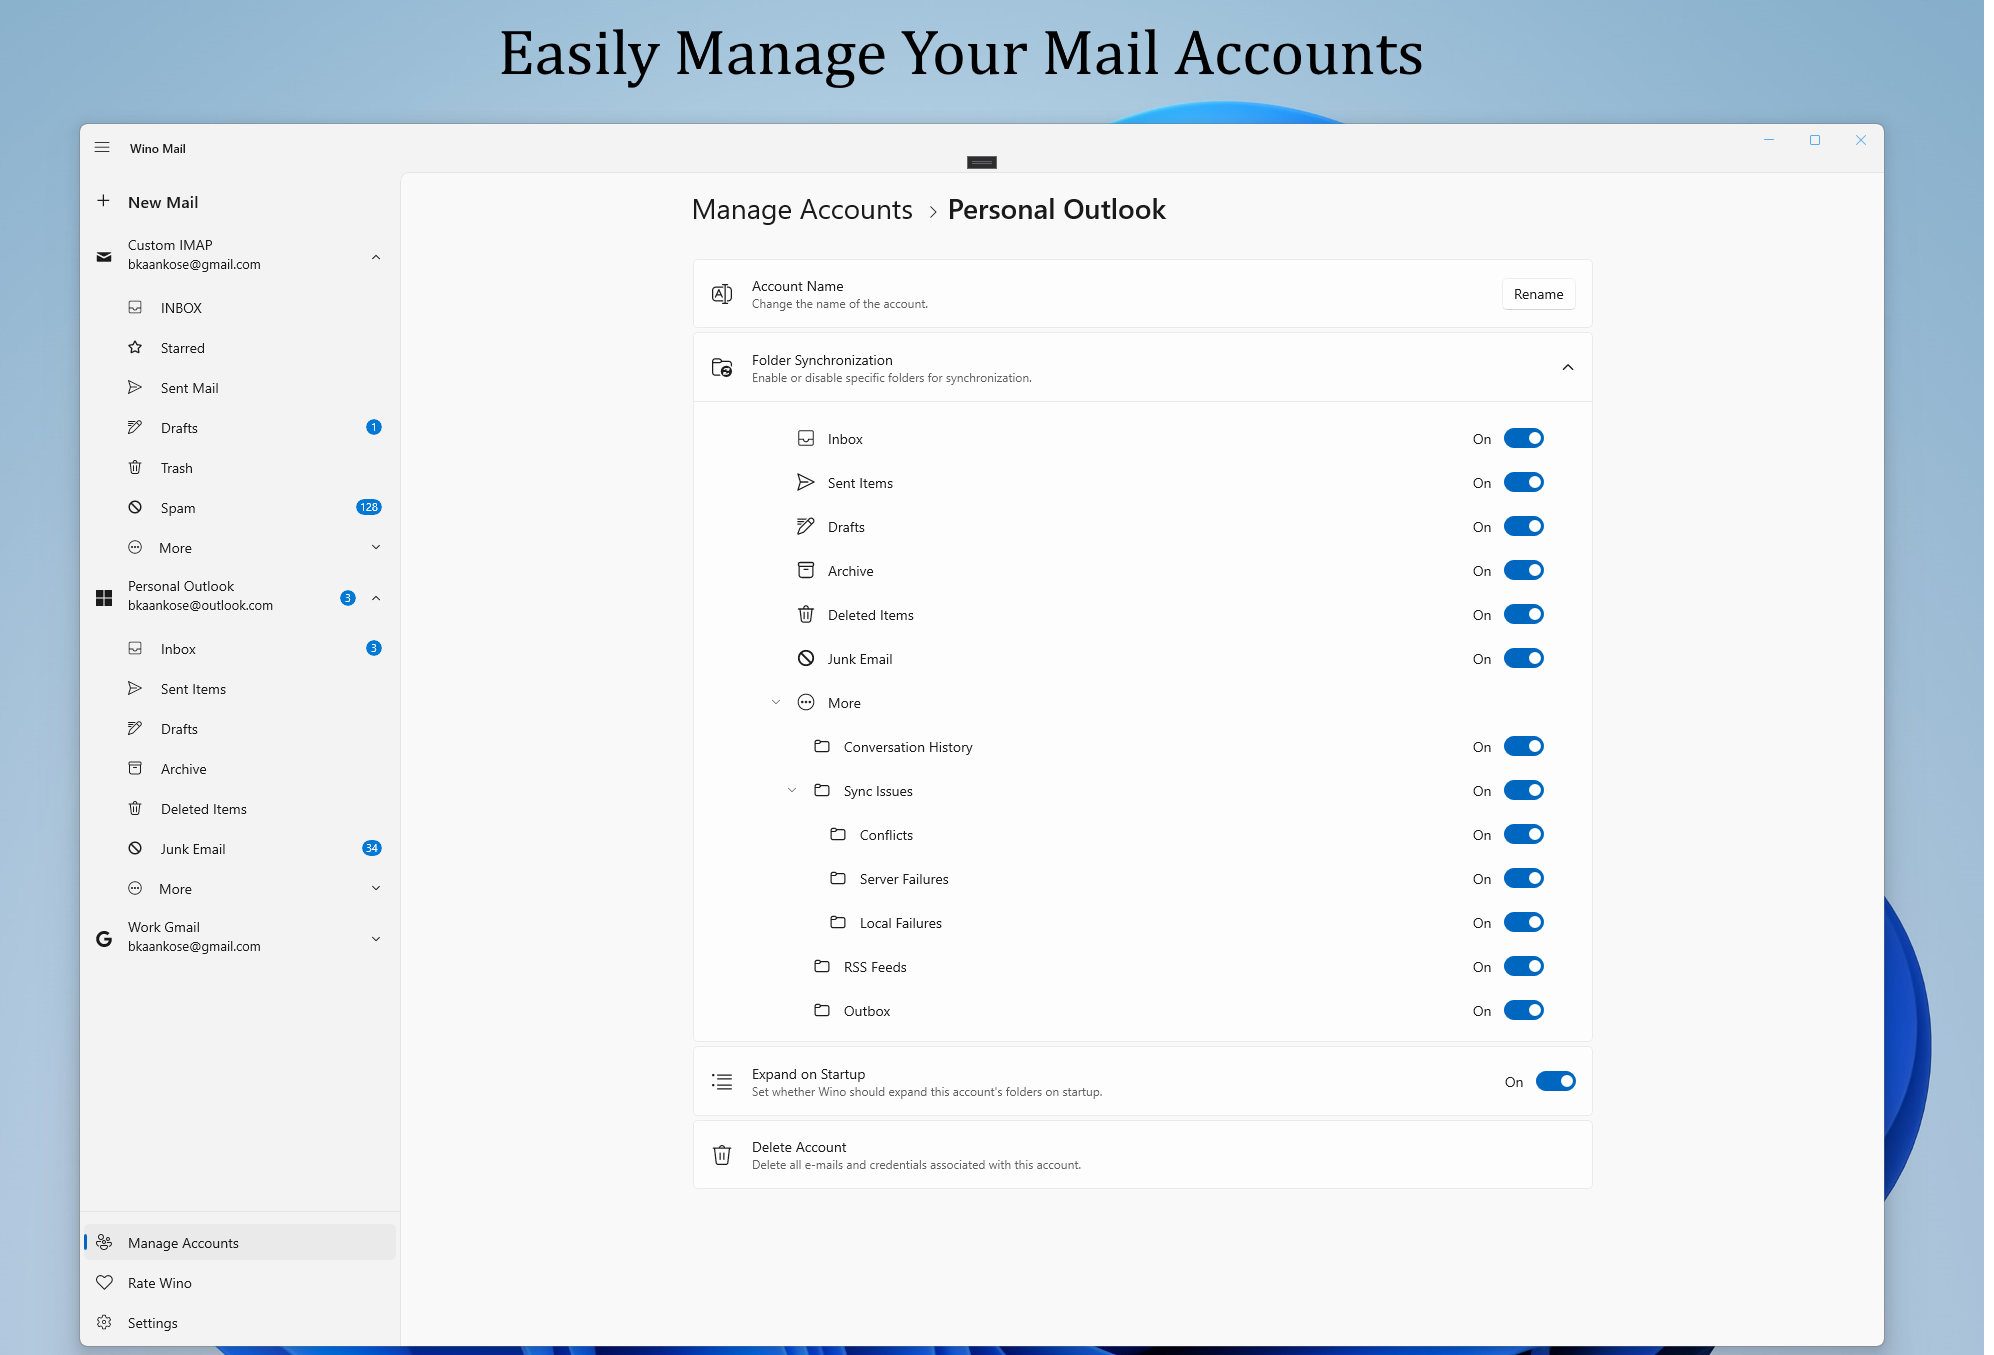 You can customize each account settings individually.